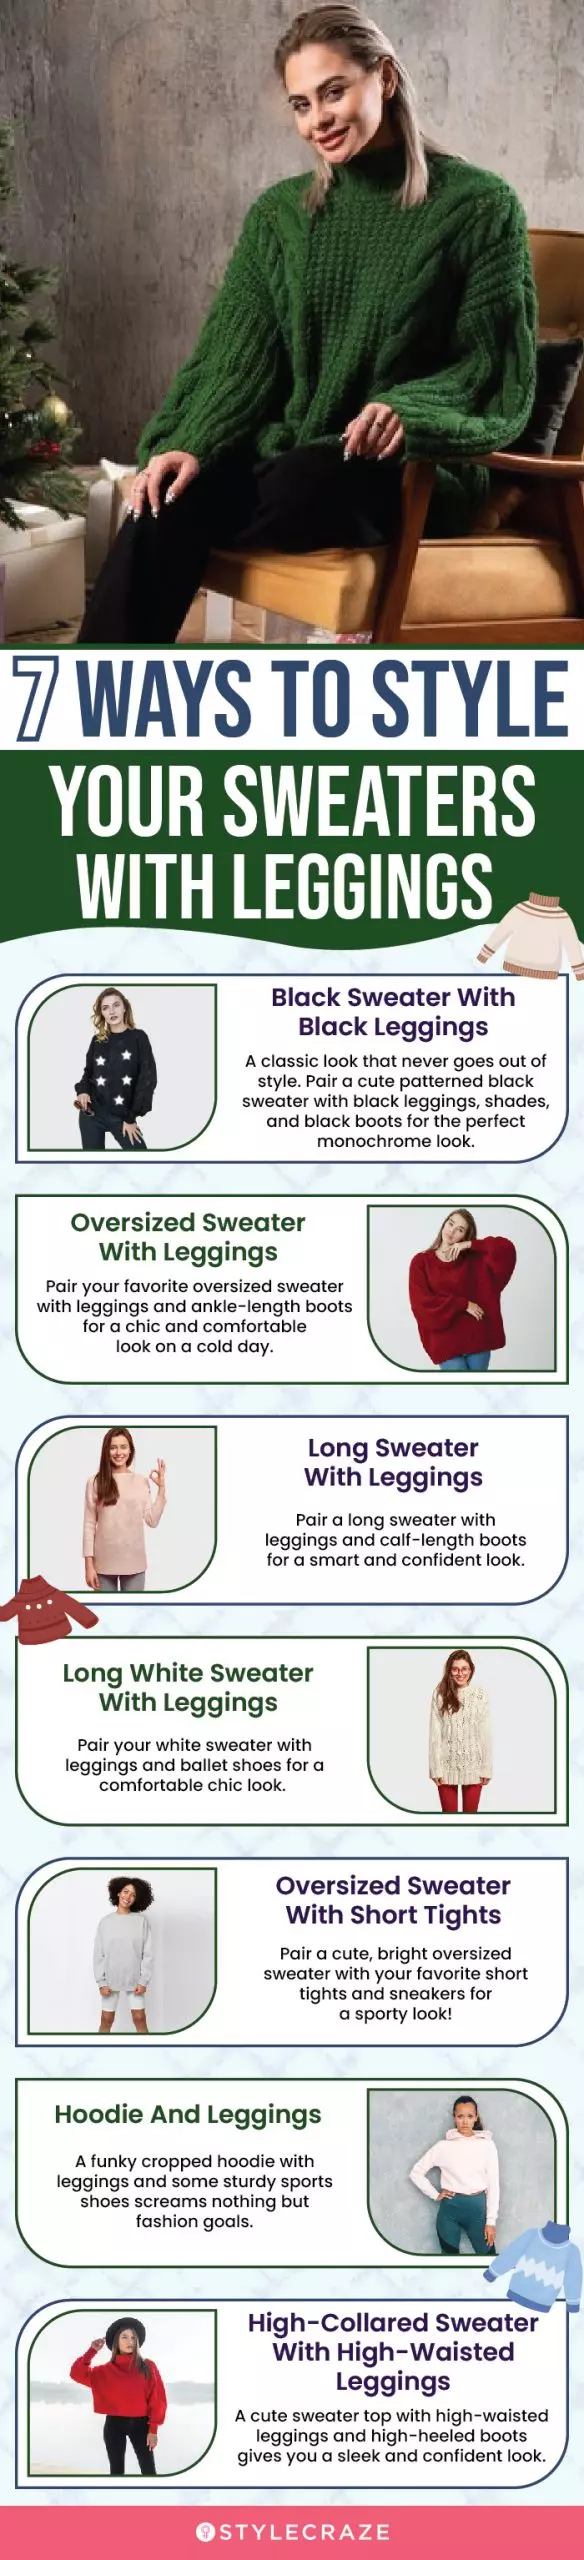 7 ways to style your sweaters with leggings (infographic)